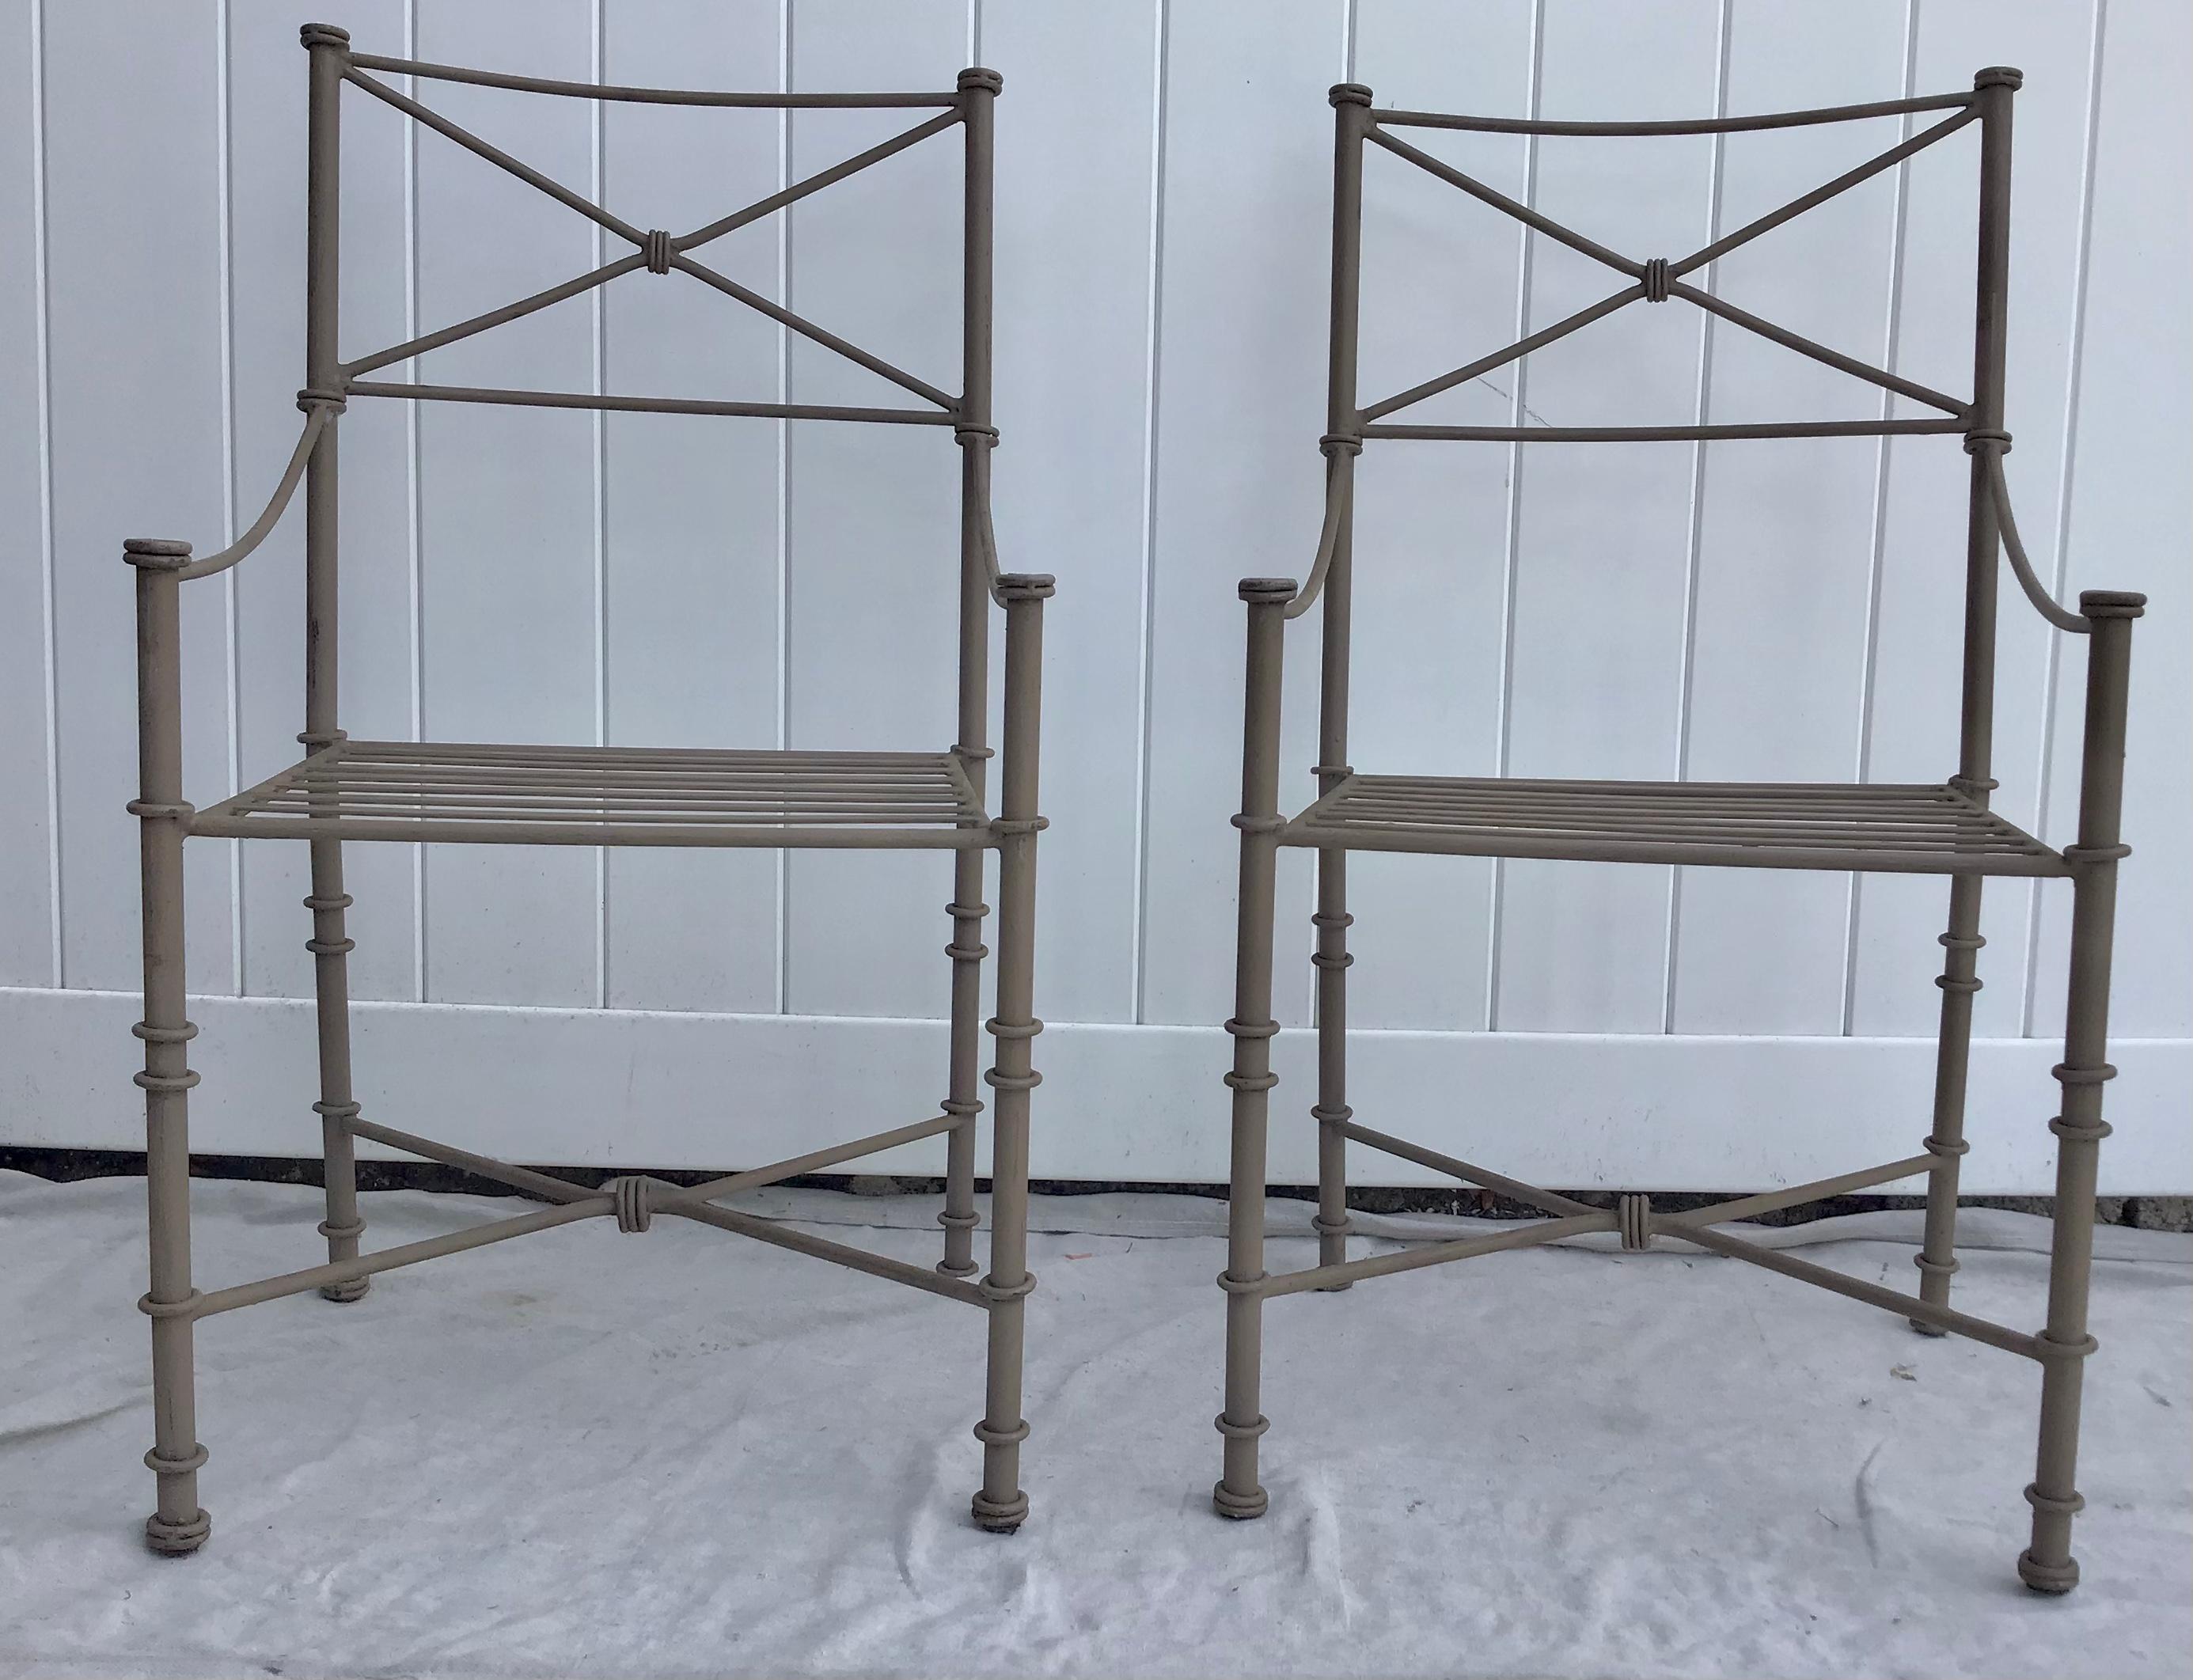 Neoclassical Giacometti Inspired Iron Garden Patio Chairs, Set of 4